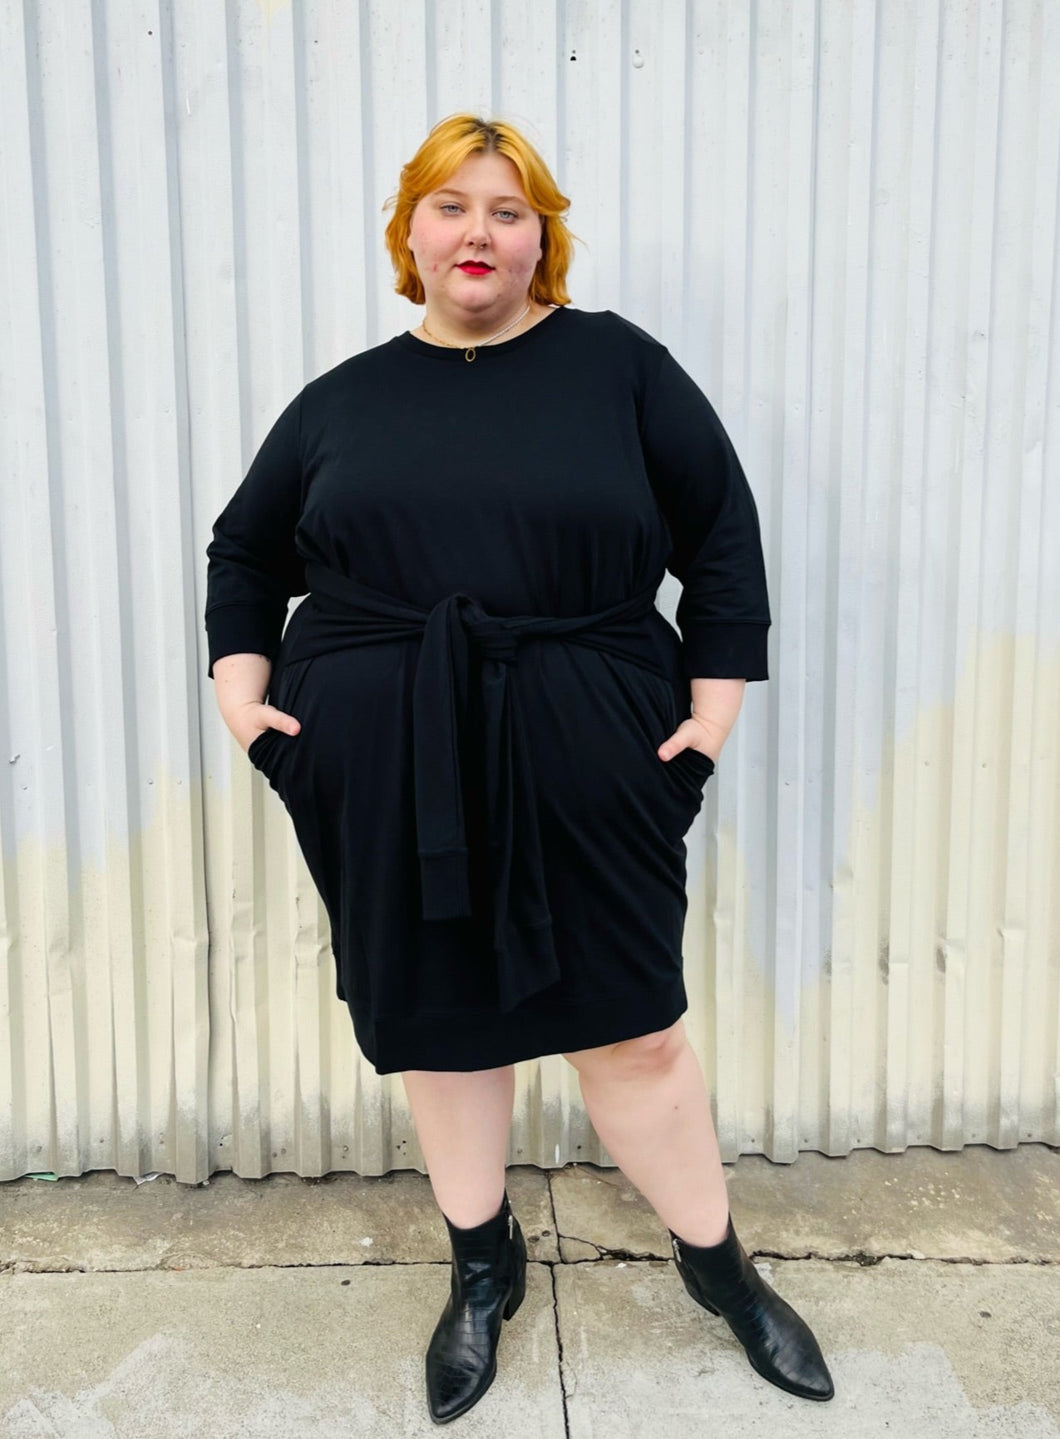 Full-body front view of a size XL (size 24/26) Universal Standard black sweatshirt-style crew neck dress with waist tie detail styled with black pointy boots on a size 22/24 model. The photo is taken outside in natural lighting.